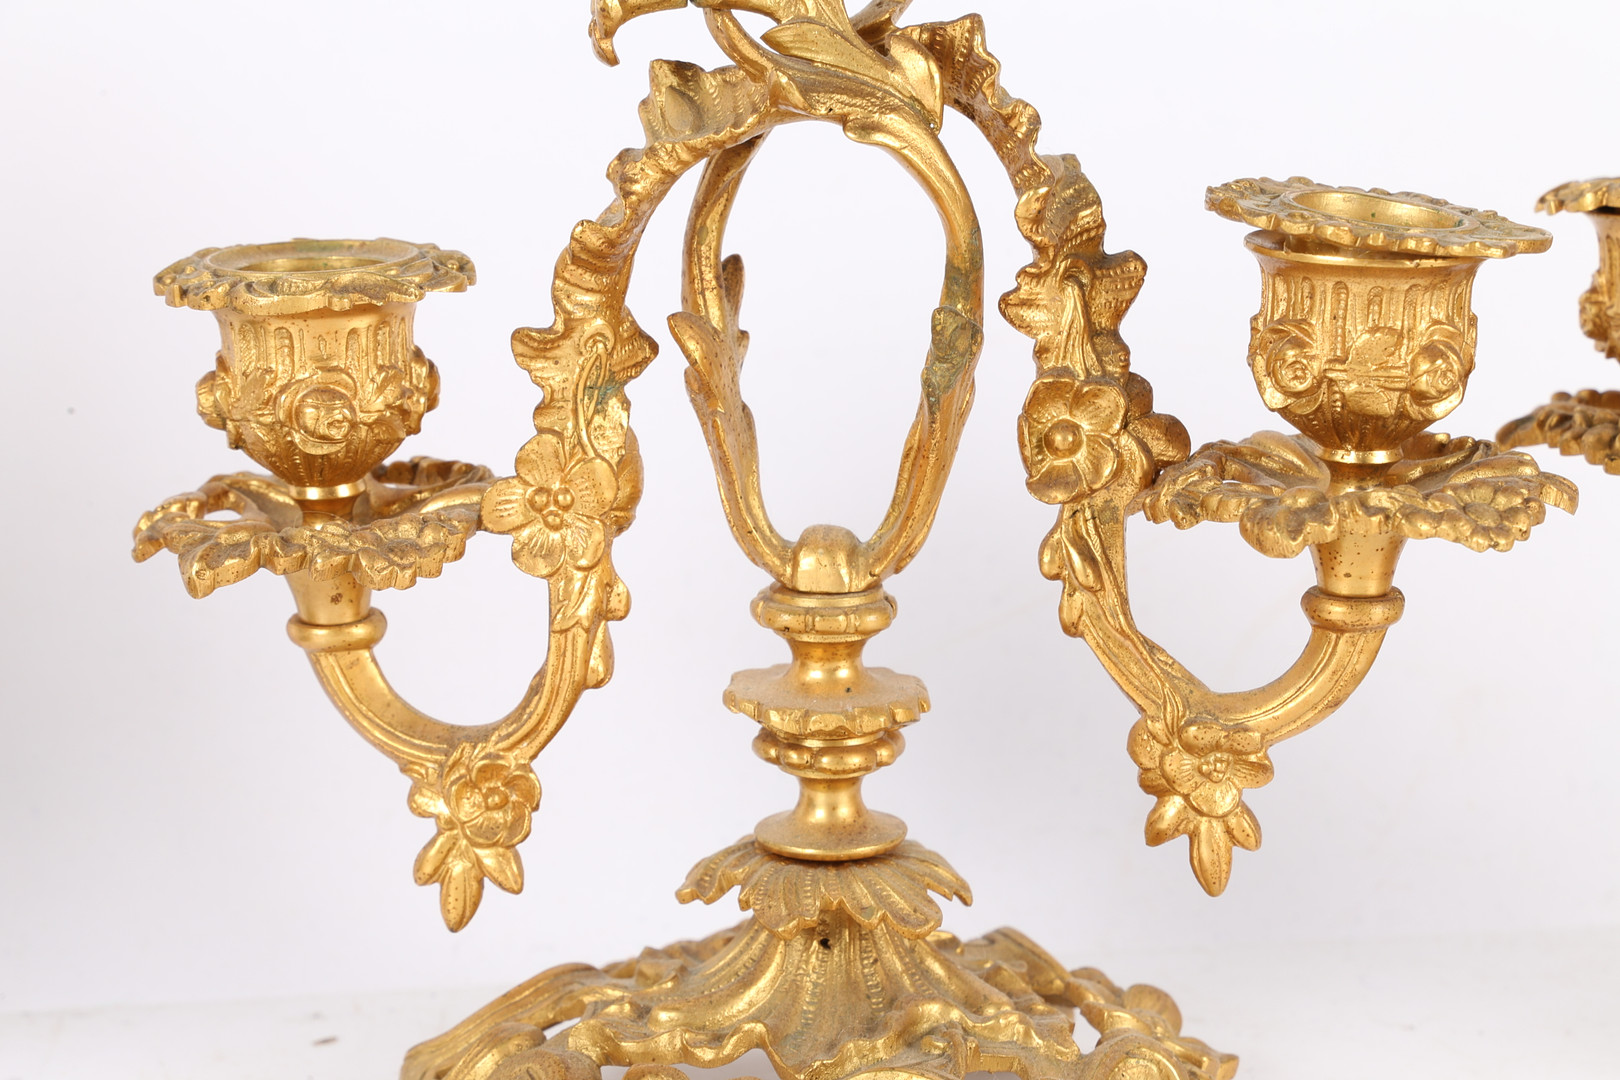 A PAIR OF LATE 19TH CENTURY FRENCH ORMOLU CANDLESTICKS. - Image 3 of 4